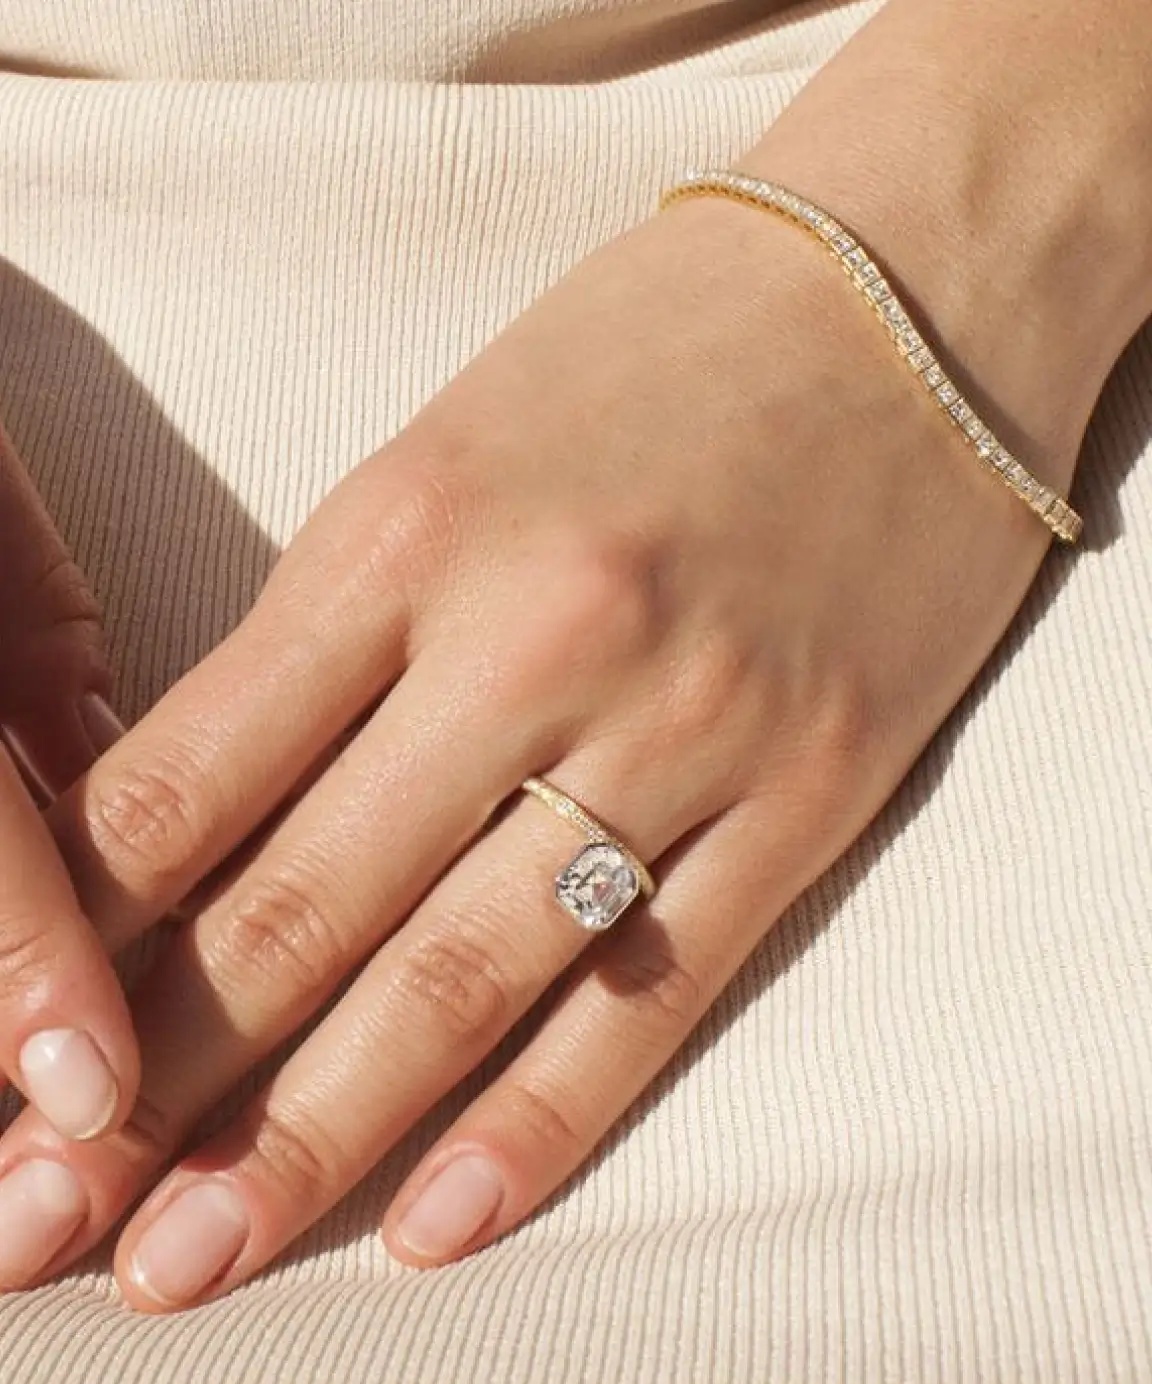 All You Need to Know about Floating Diamond Rings